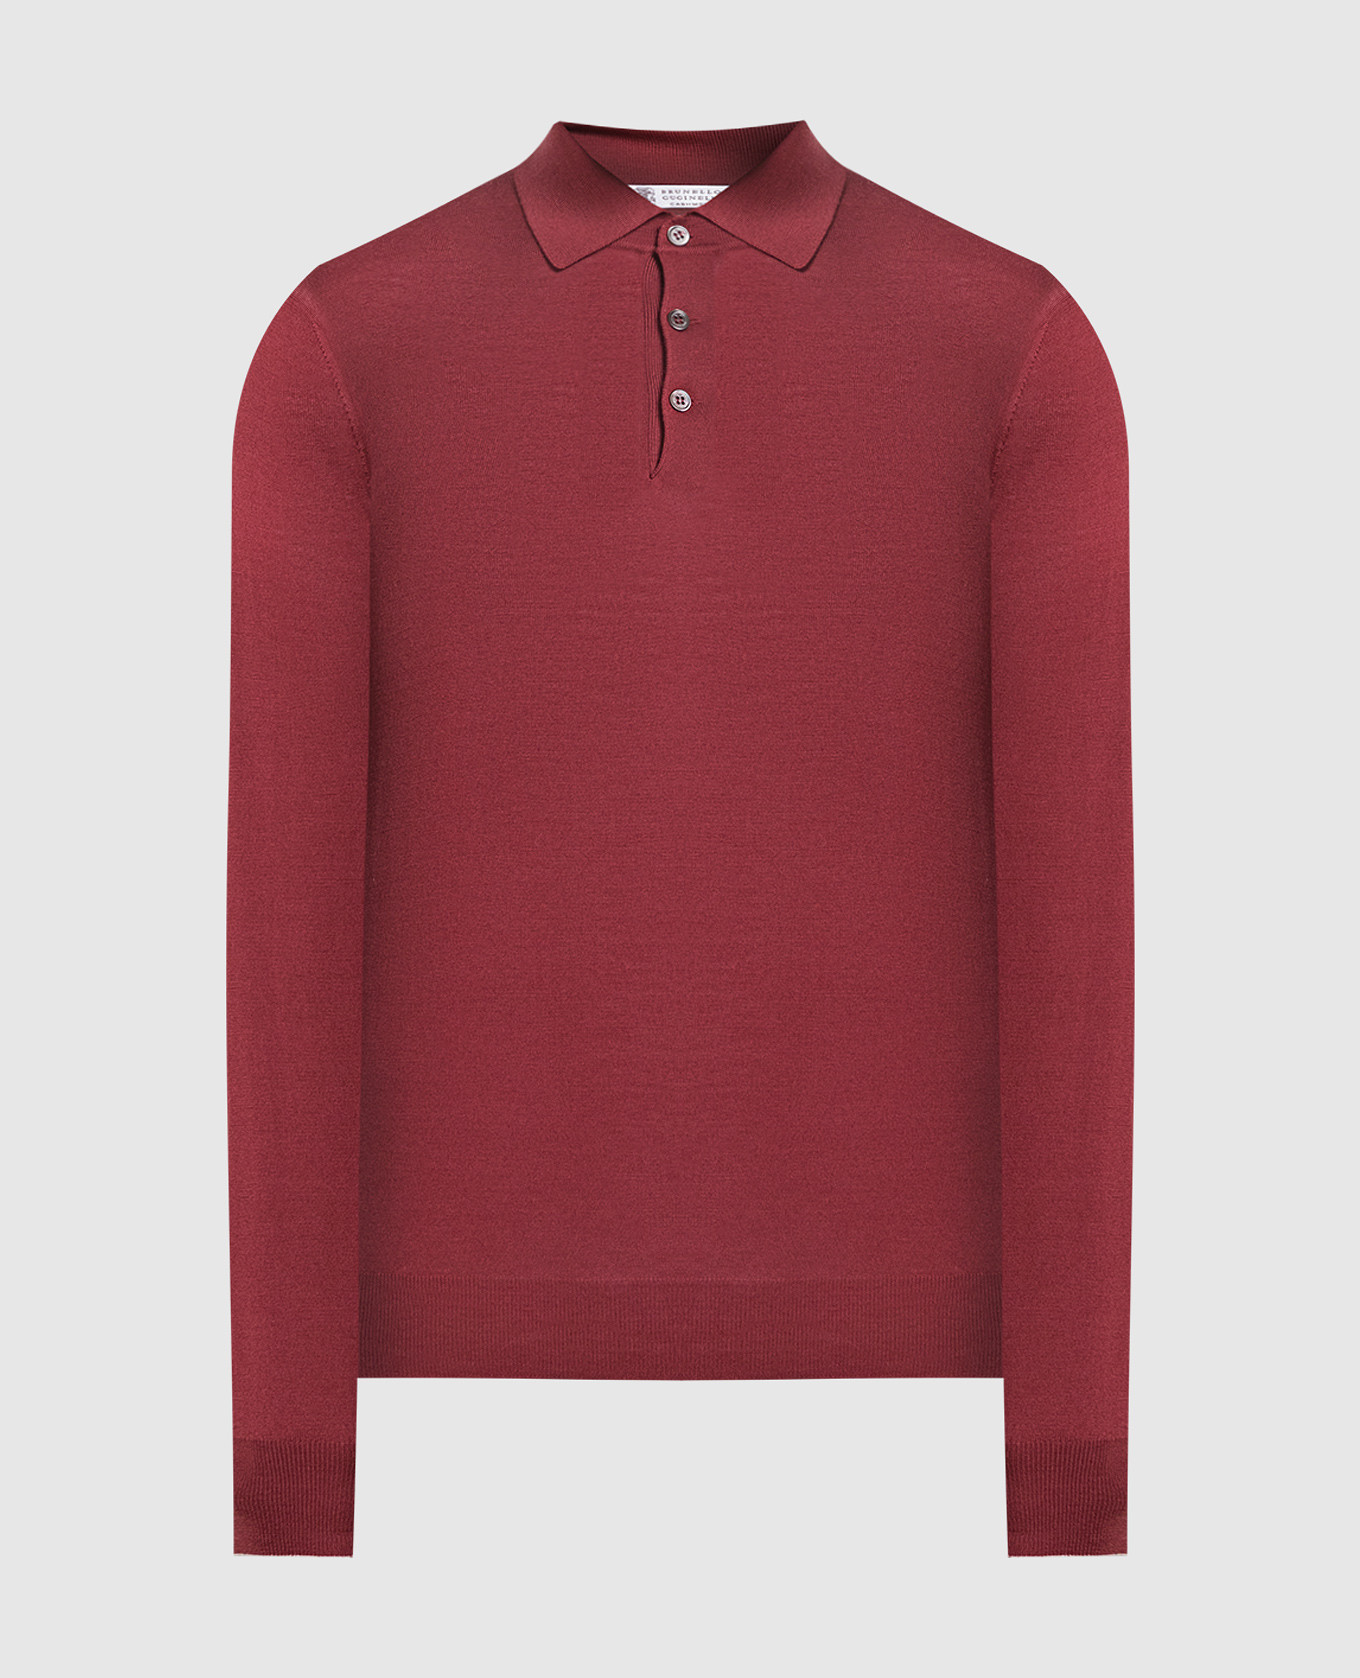 Burgundy wool and cashmere polo shirt